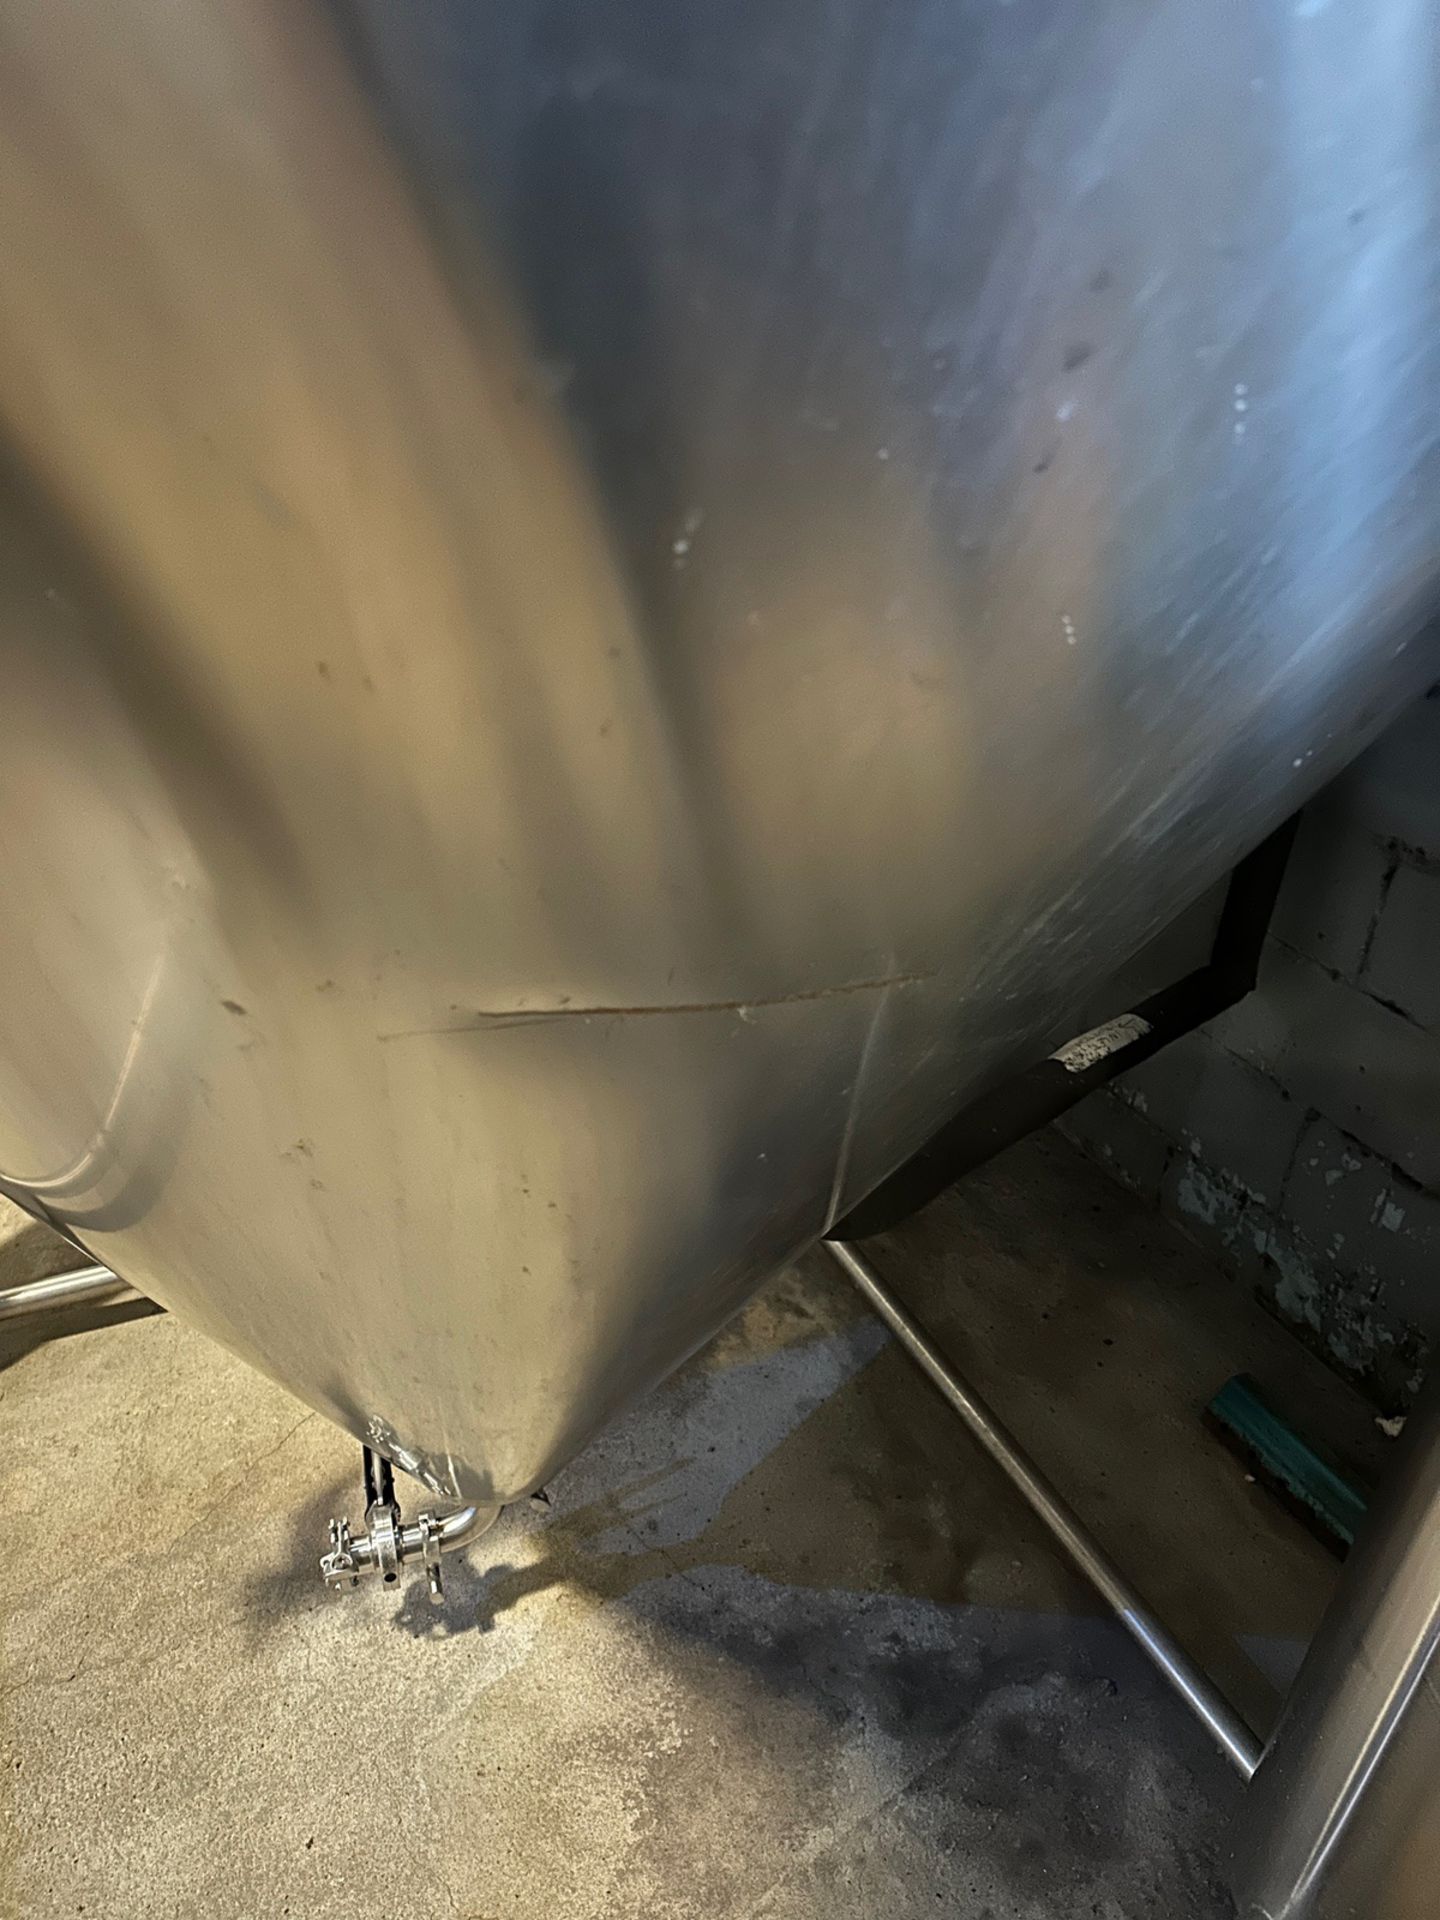 SK Brew Pro Technologies 60 BBL Fermenter, Glycol Jacketed, S/N: 151000980, Approx | Rig Fee $2250 - Image 7 of 7